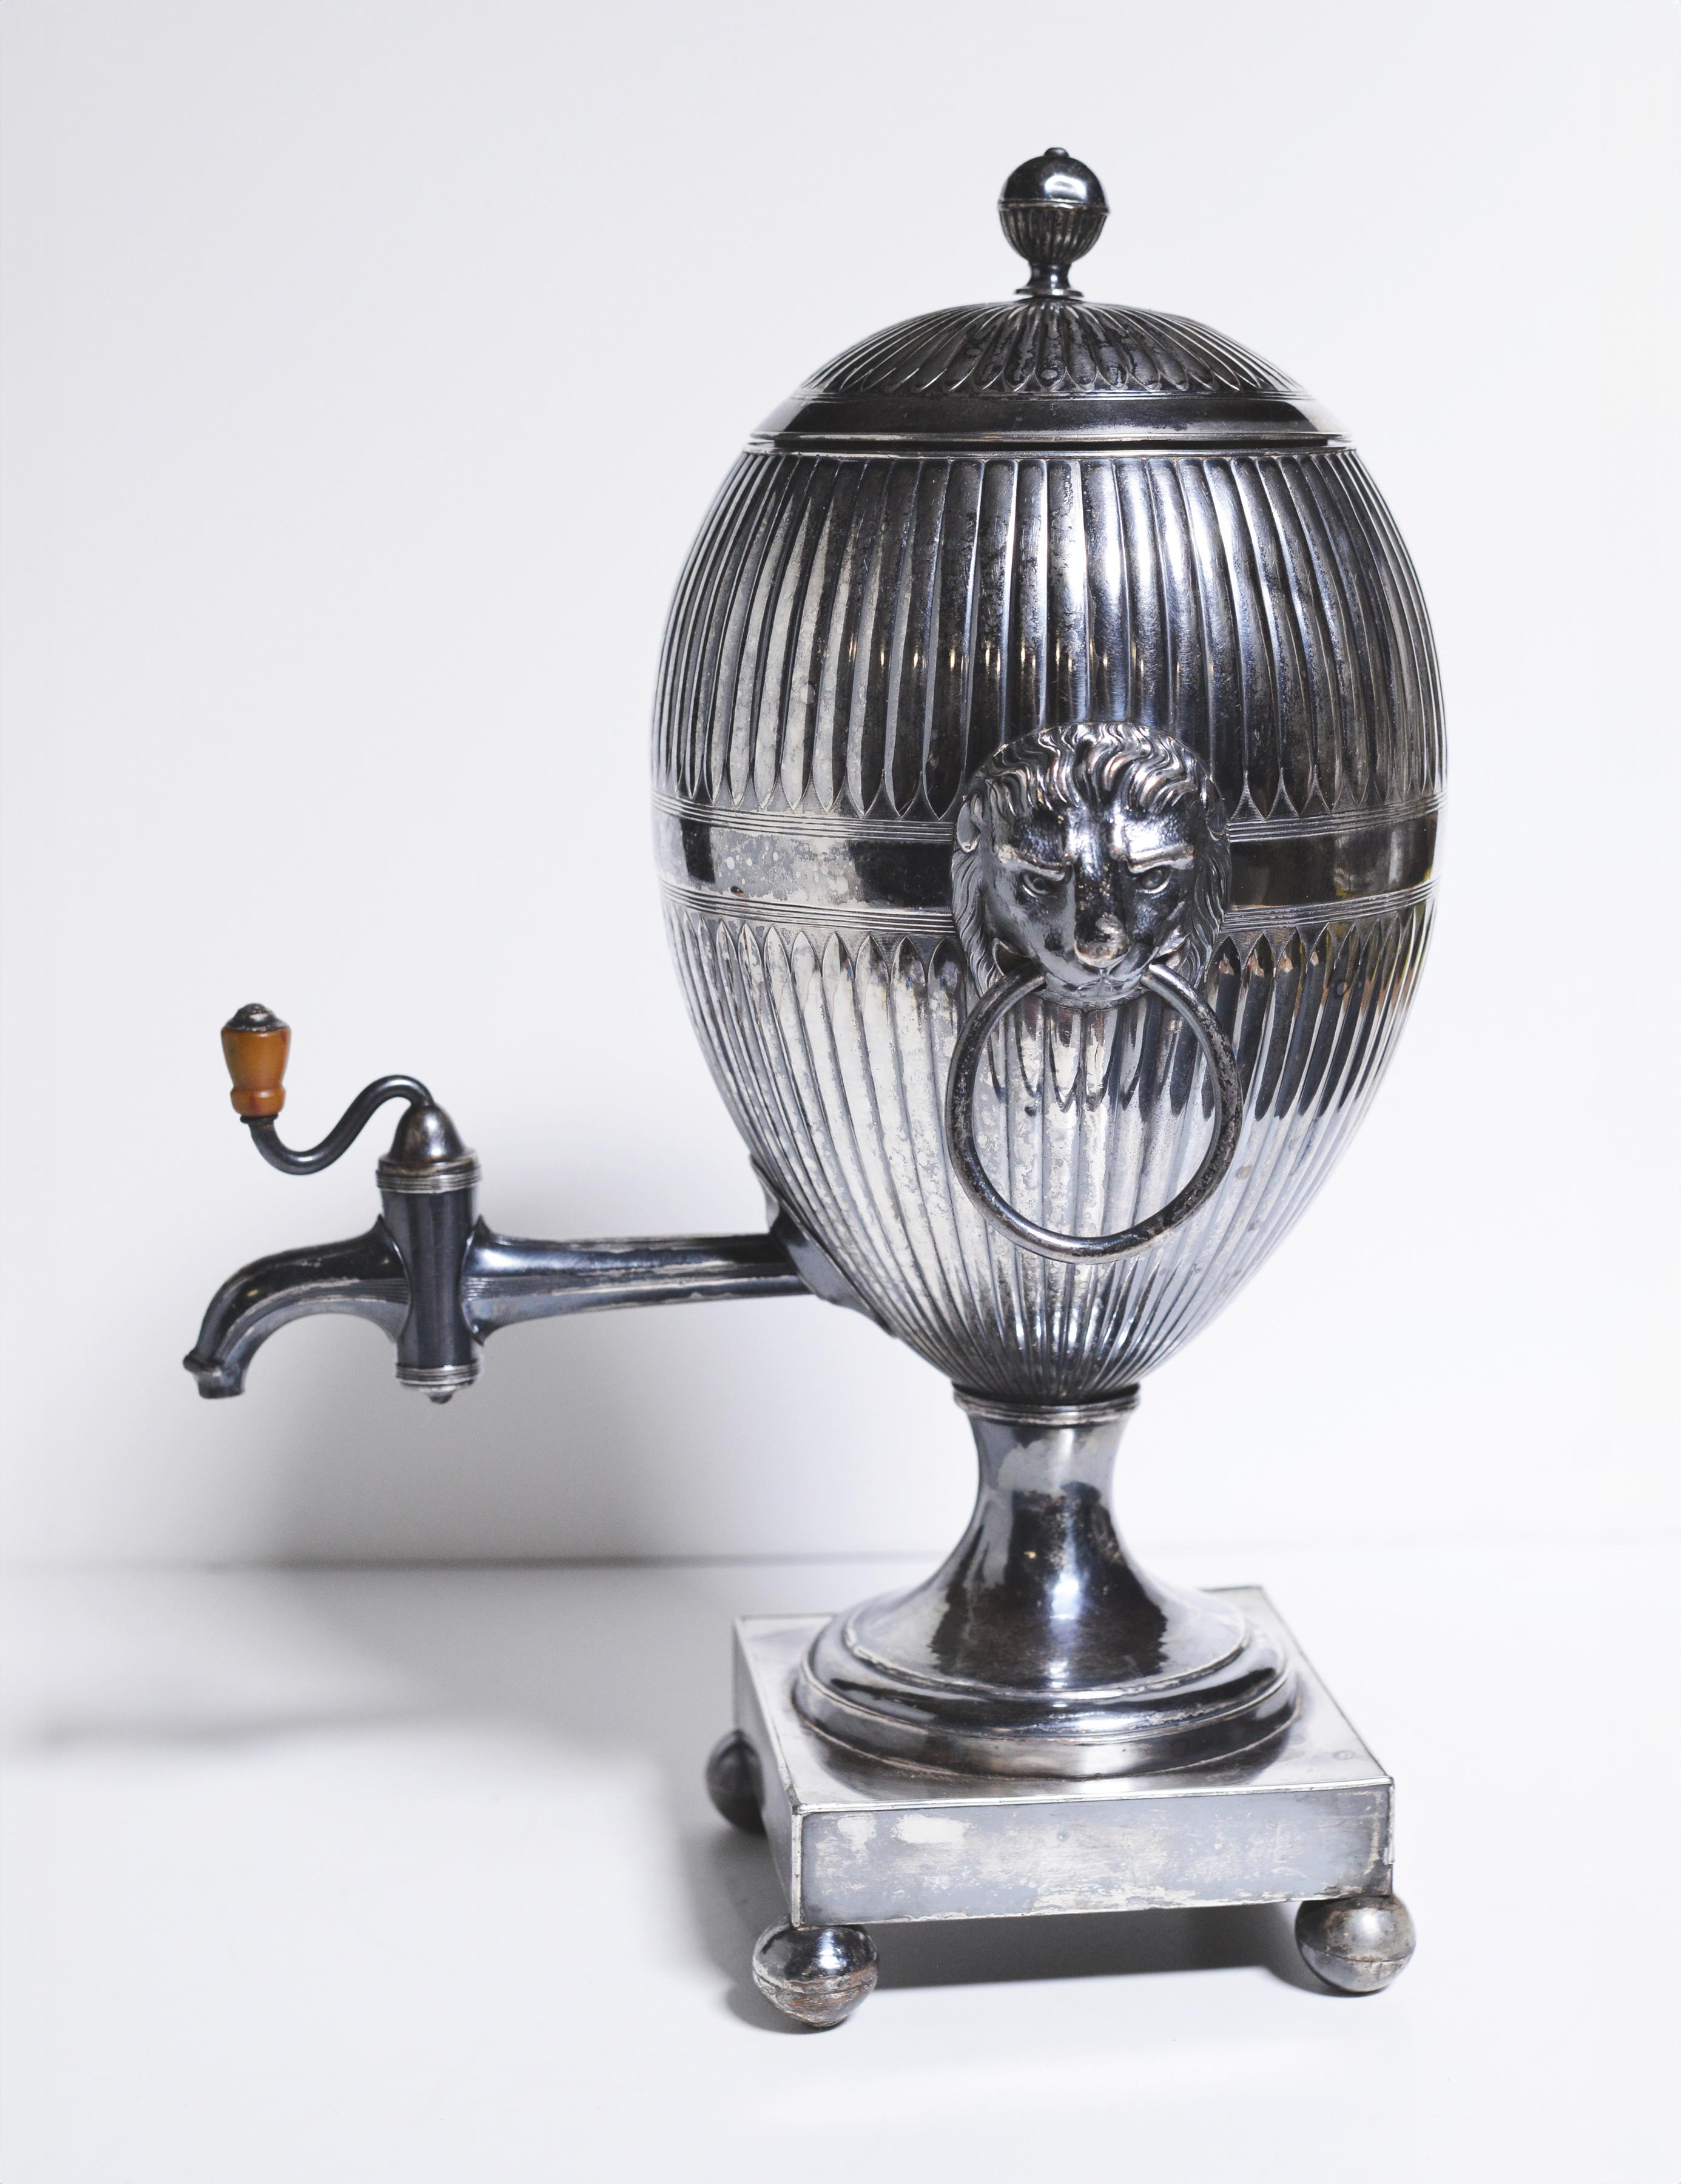 Hand-Crafted British Silver Plated Tea Urn Samovar 19th century Egg Shaped with Lion Heads For Sale